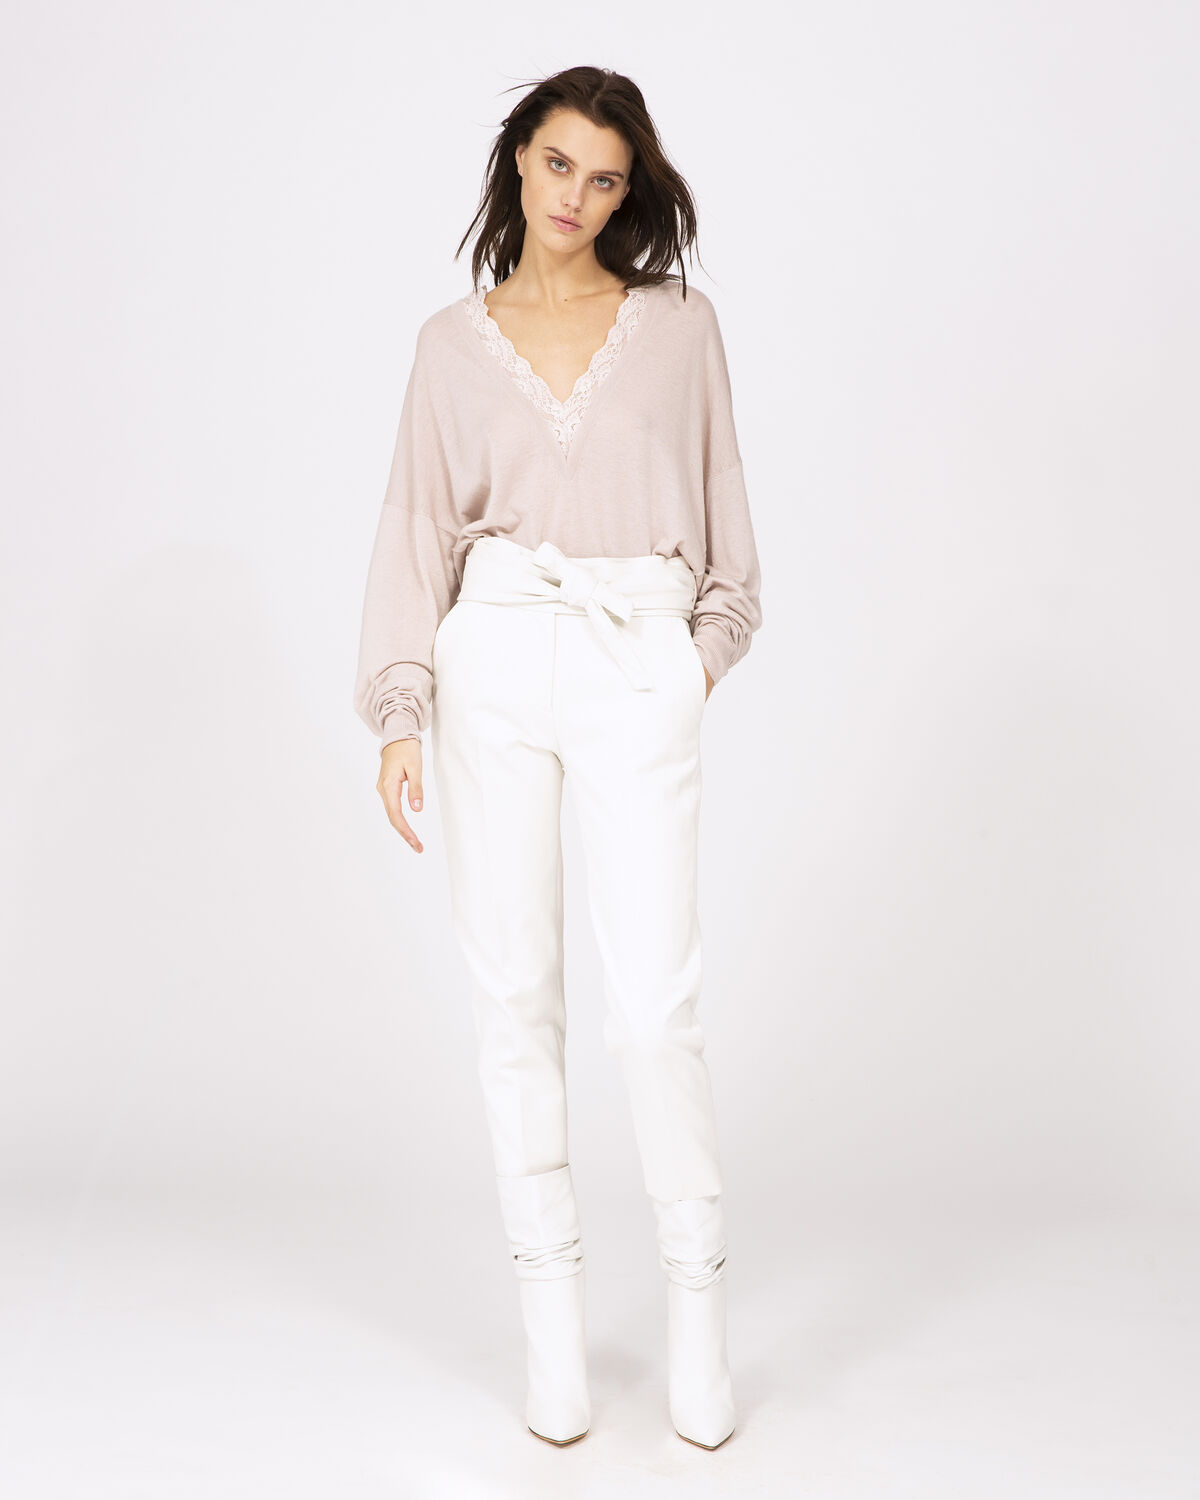 Photo of IRO Paris Gracious Pants Ecru - These High Waist Pants Are Characterized By Their Wide Waistband And Straight Cut. Wear Them With A Long-sleeve Top And A Pair Of Boots For A Modern And Elegant Look. Spring Summer 19